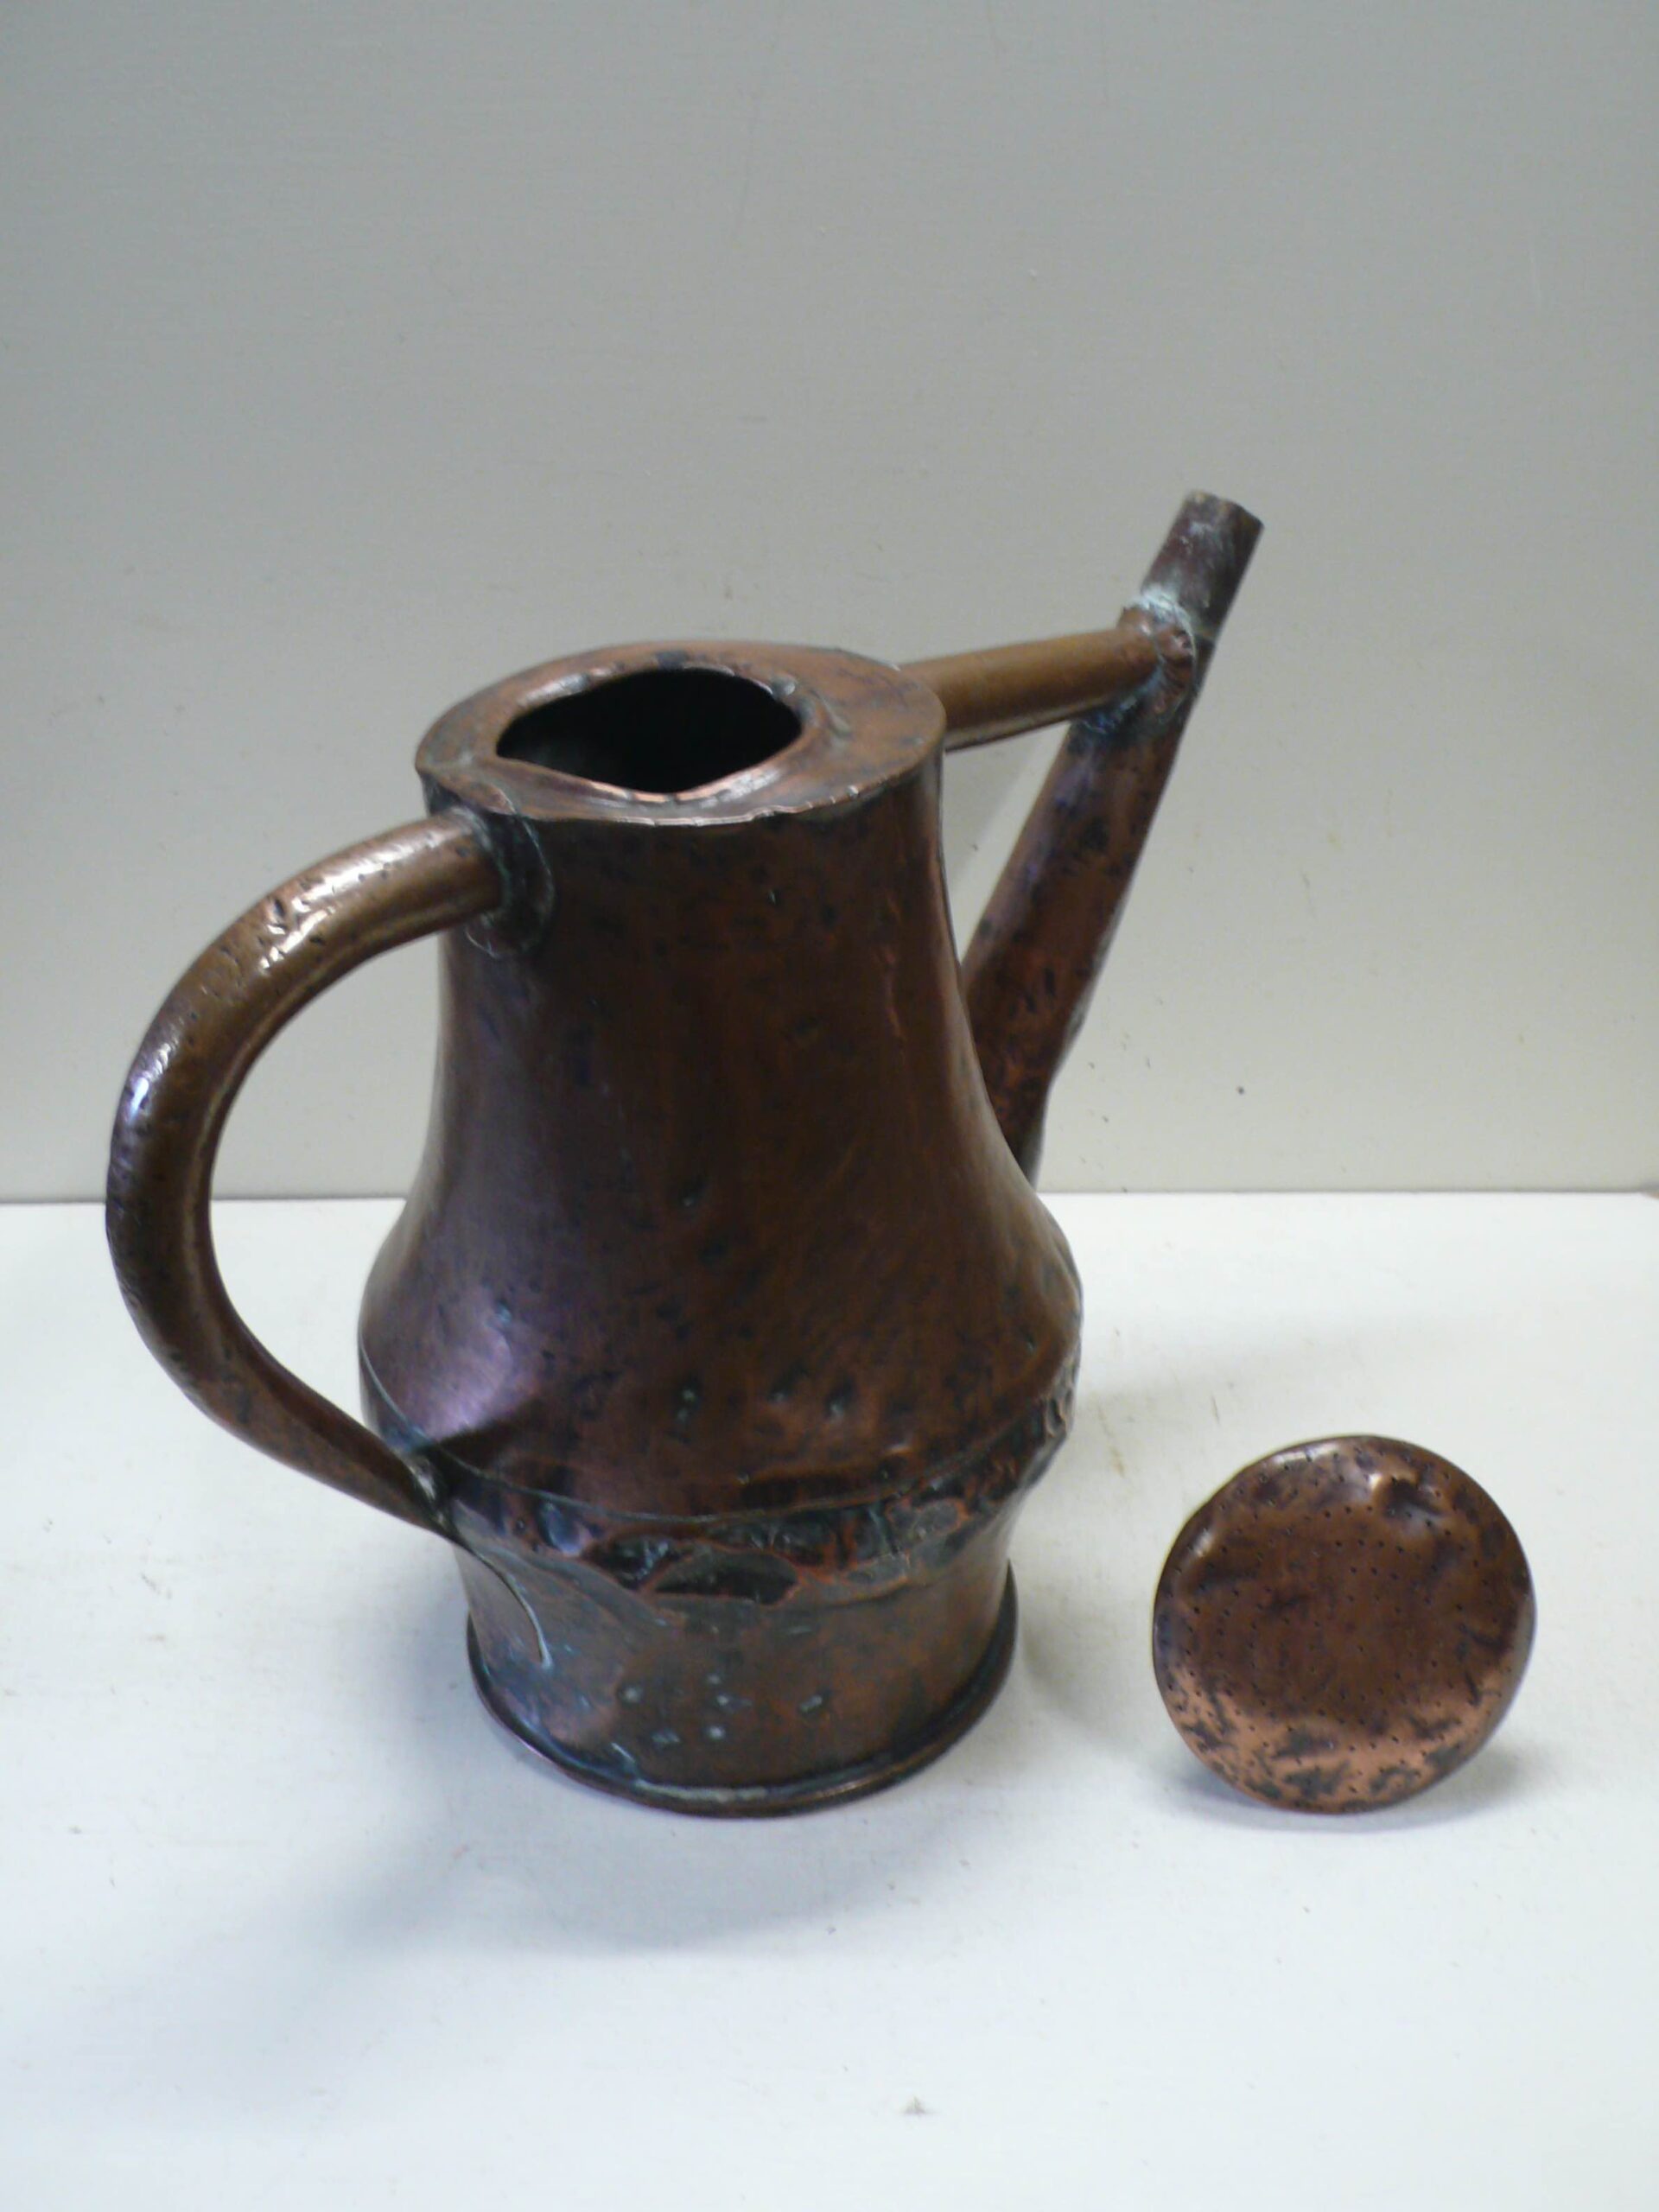 Antique French Copper Watering Can